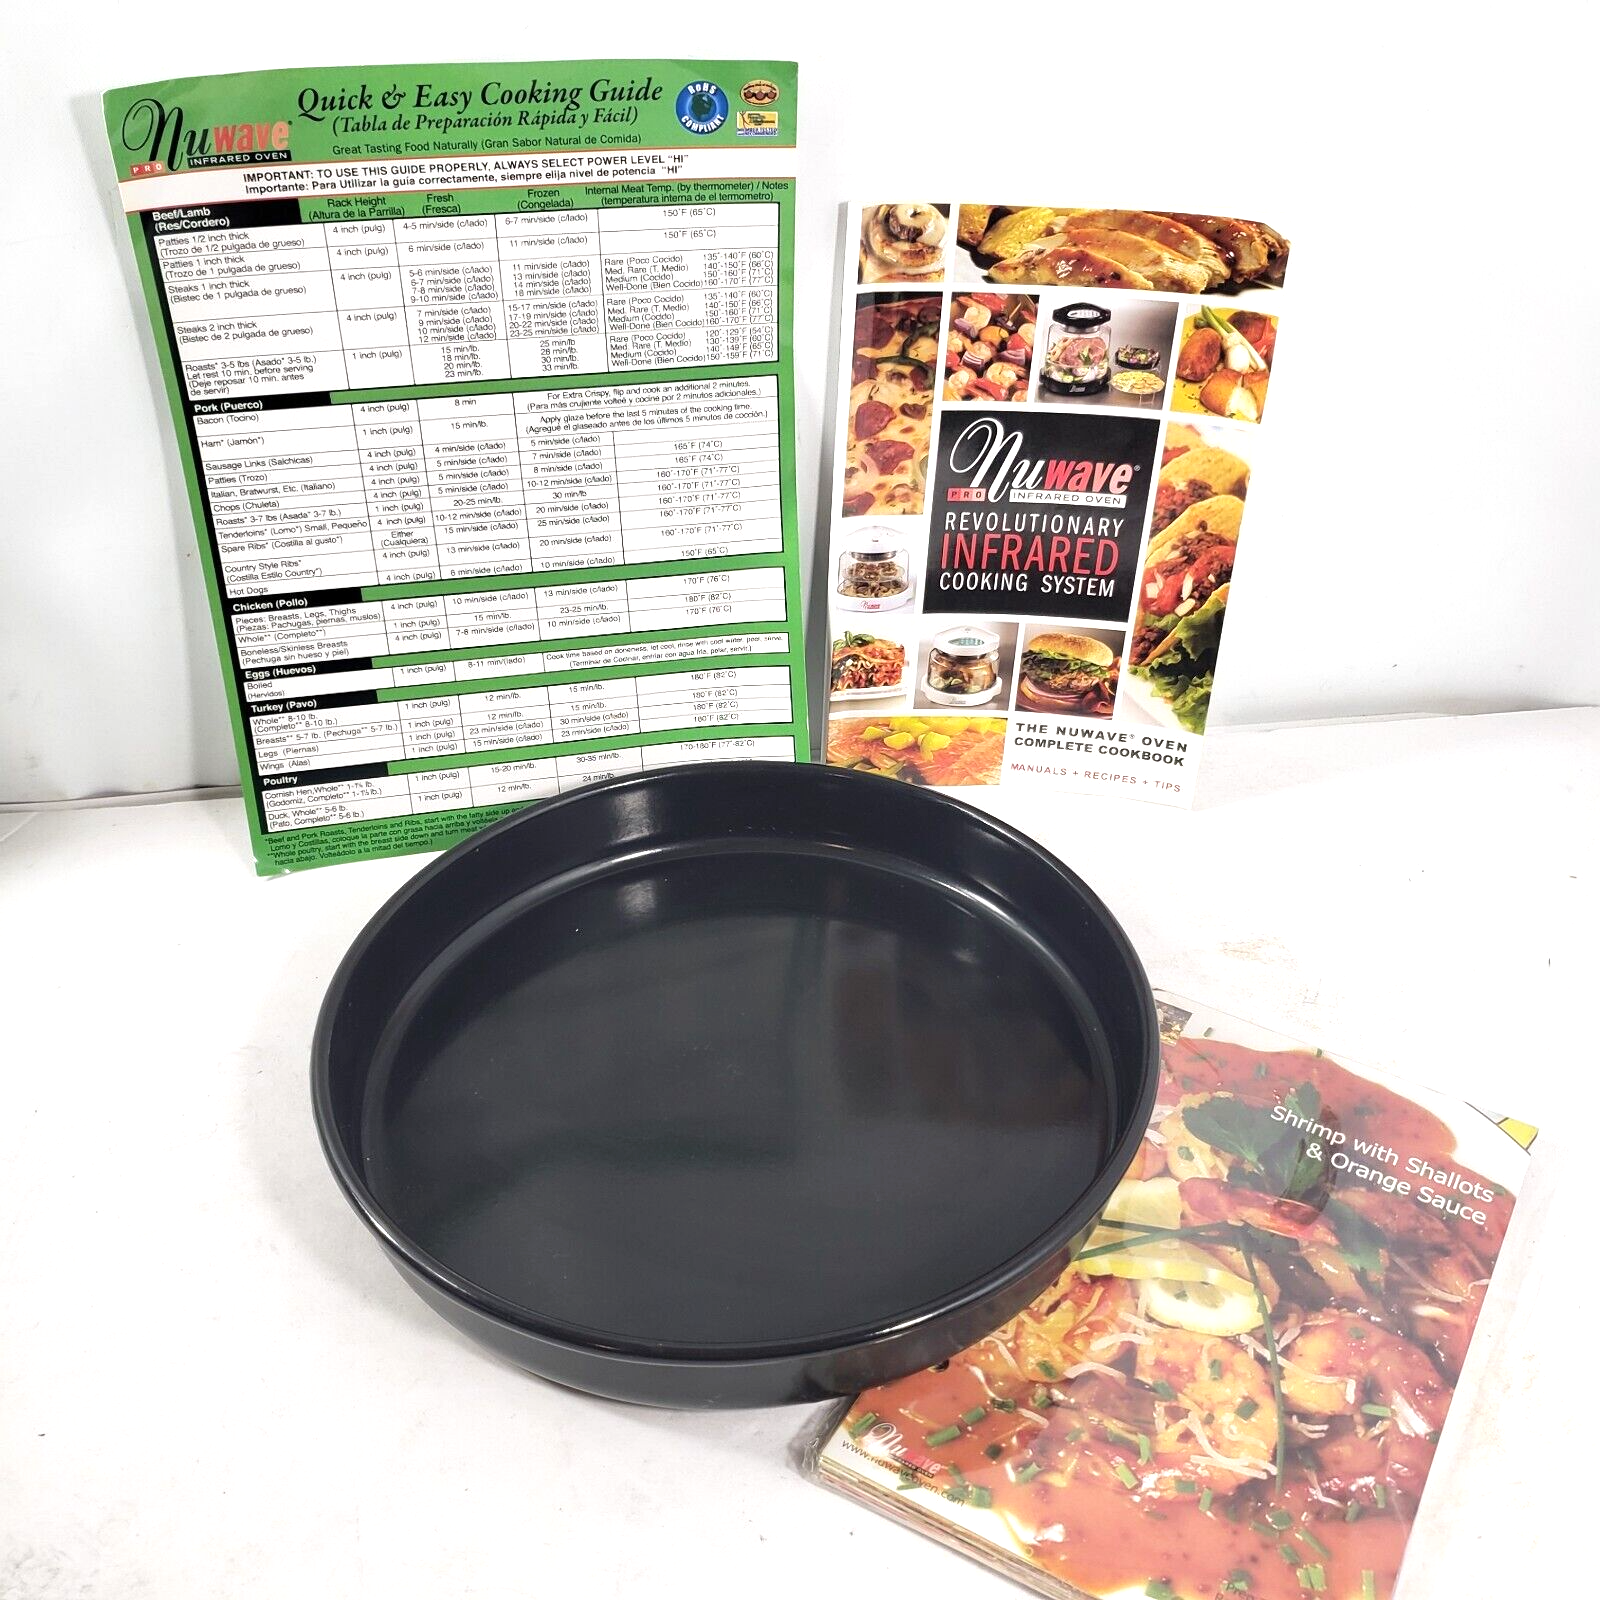 Primary image for NuWave Pro Infrared Oven 20344 10" Bake Pan, Cookbook, Recipe Card Pack + Only